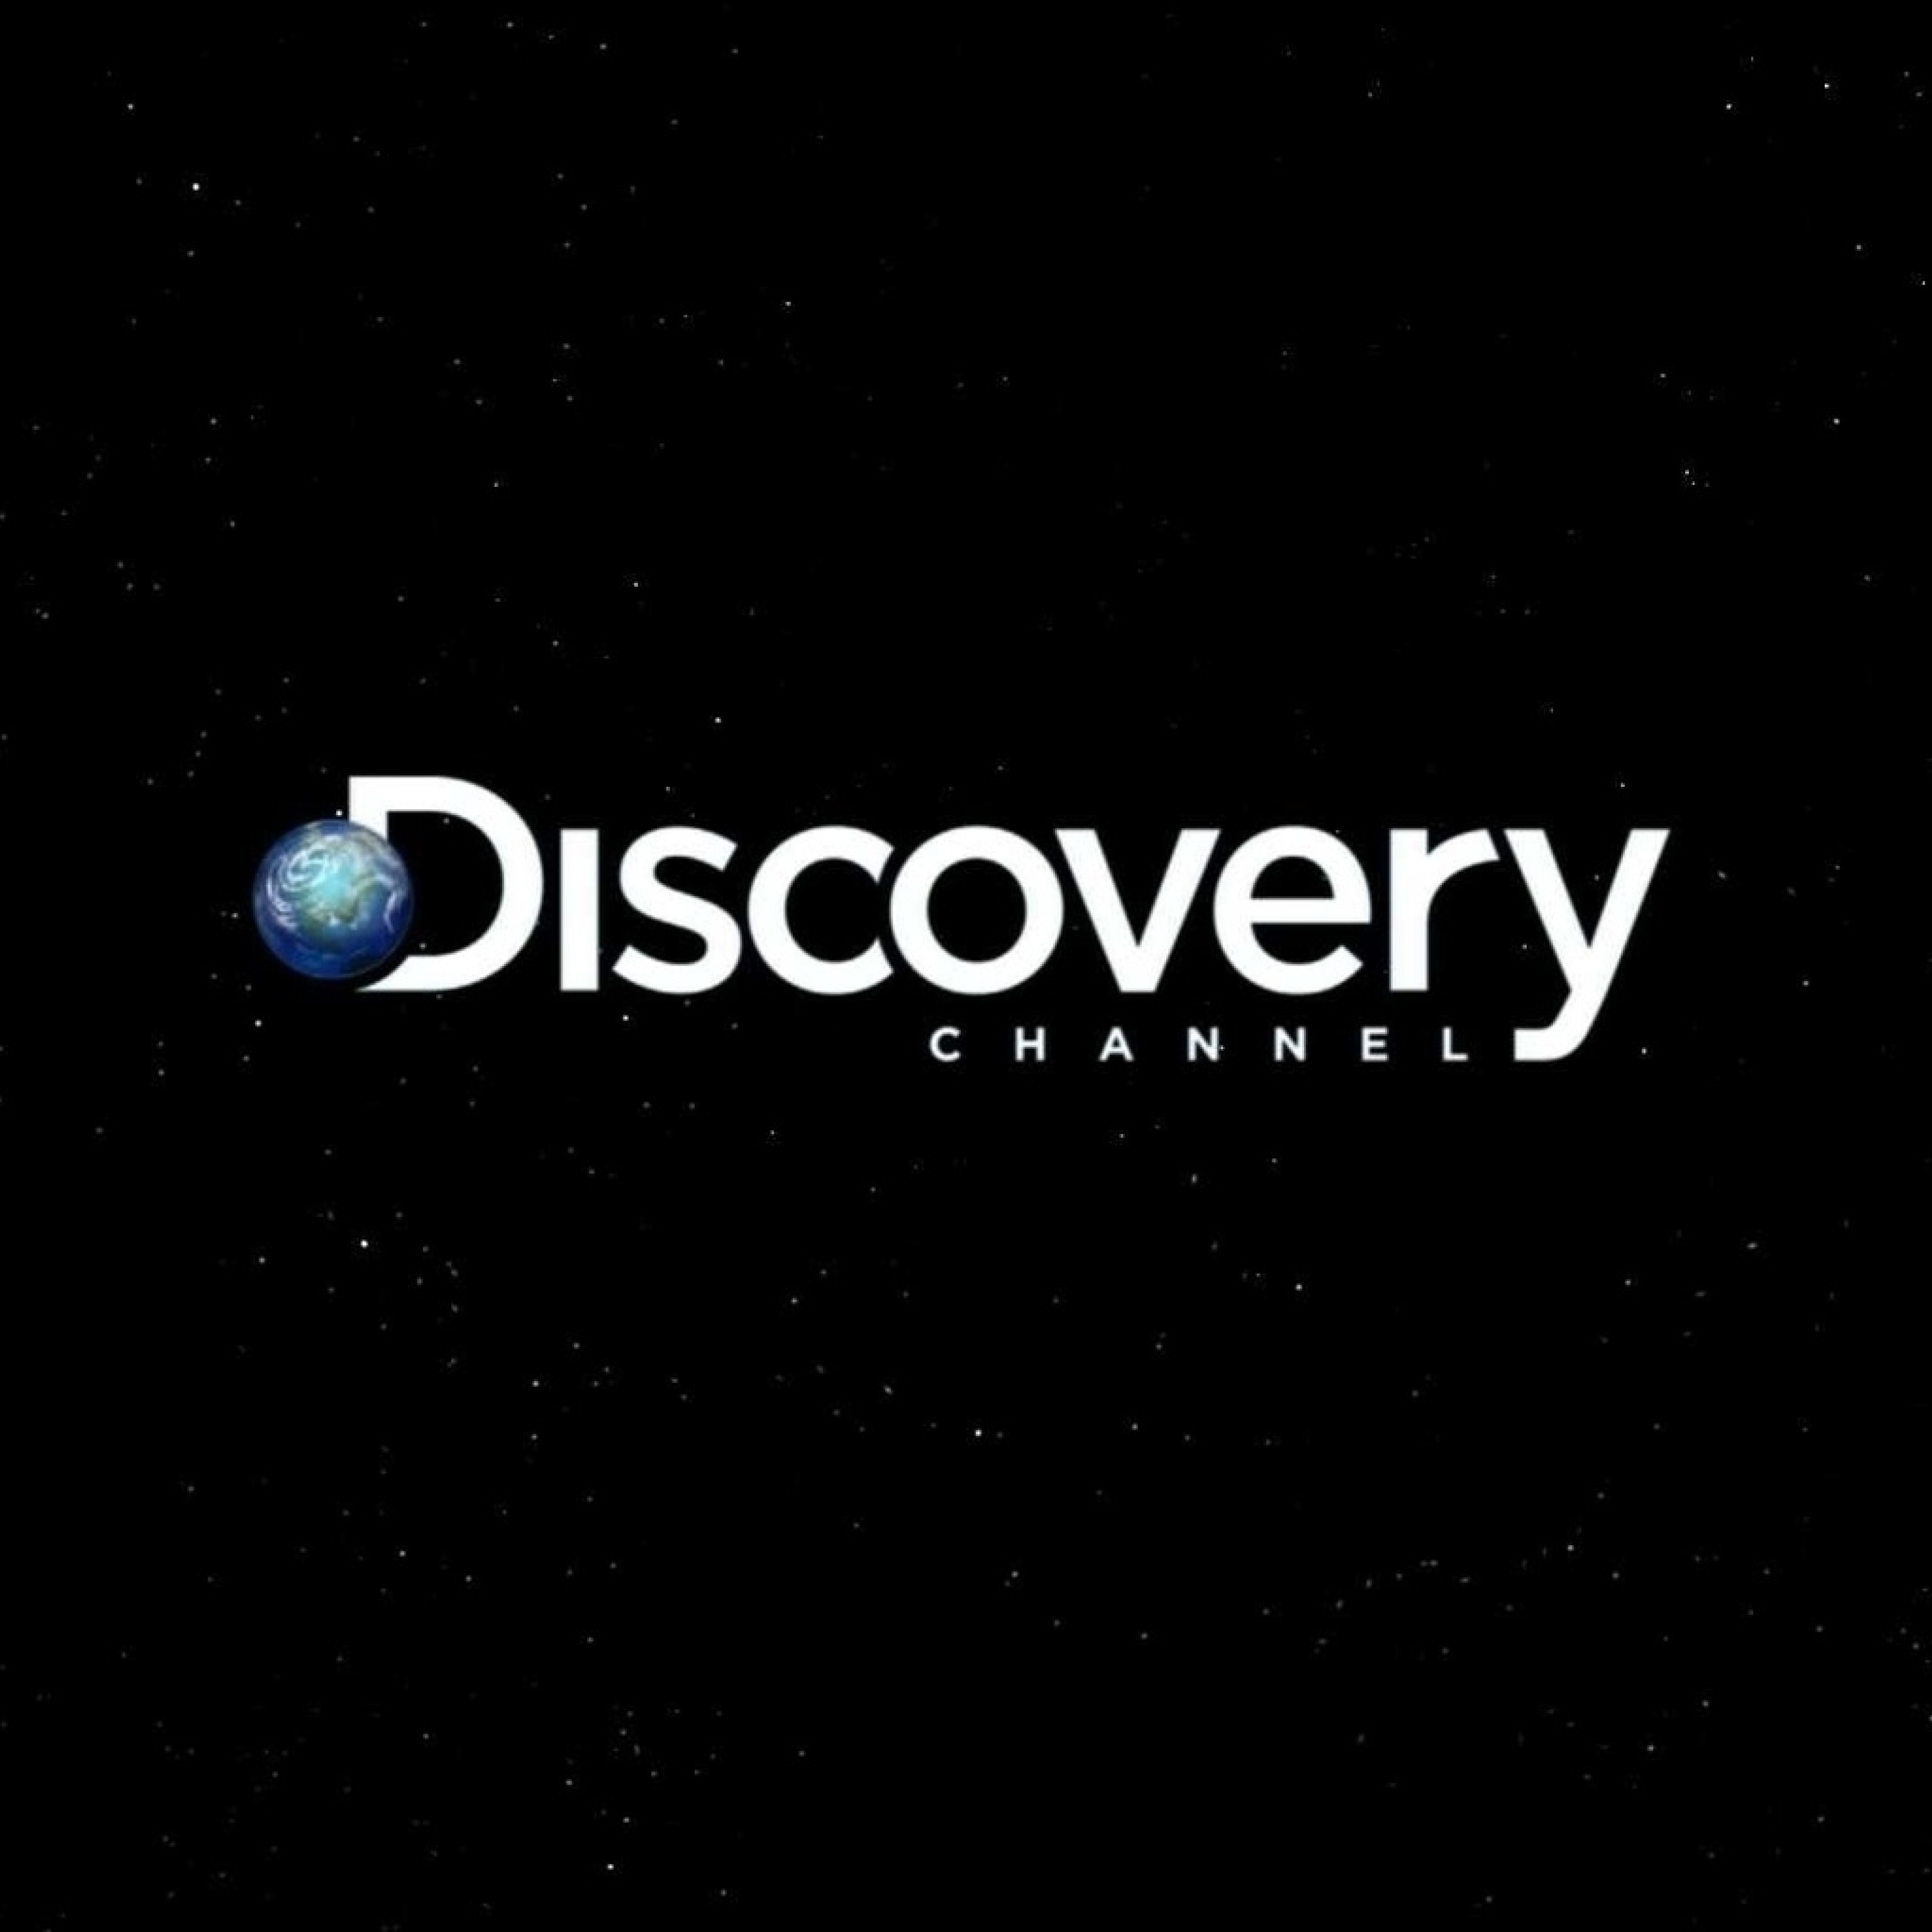 Discover f. Телеканал Discovery. Дискавери логотип. Discovery channel Россия. Логотип телеканала Discovery.